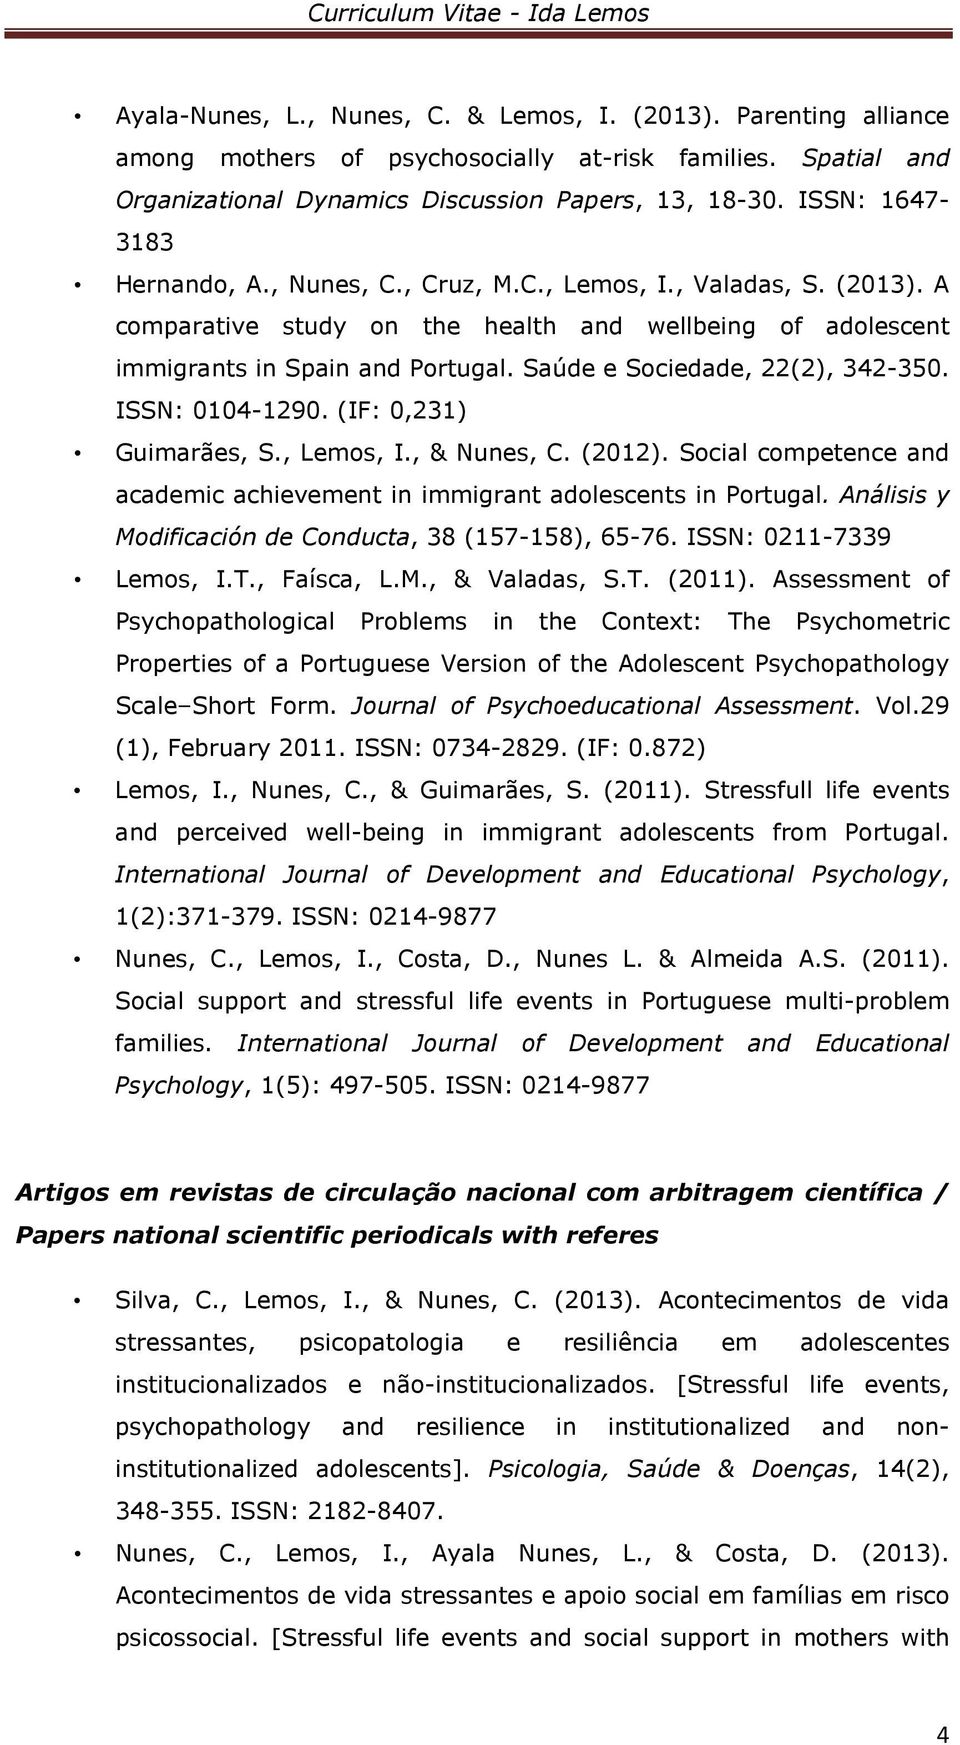 Saúde e Sociedade, 22(2), 342-350. ISSN: 0104-1290. (IF: 0,231) Guimarães, S., Lemos, I., & Nunes, C. (2012). Social competence and academic achievement in immigrant adolescents in Portugal.